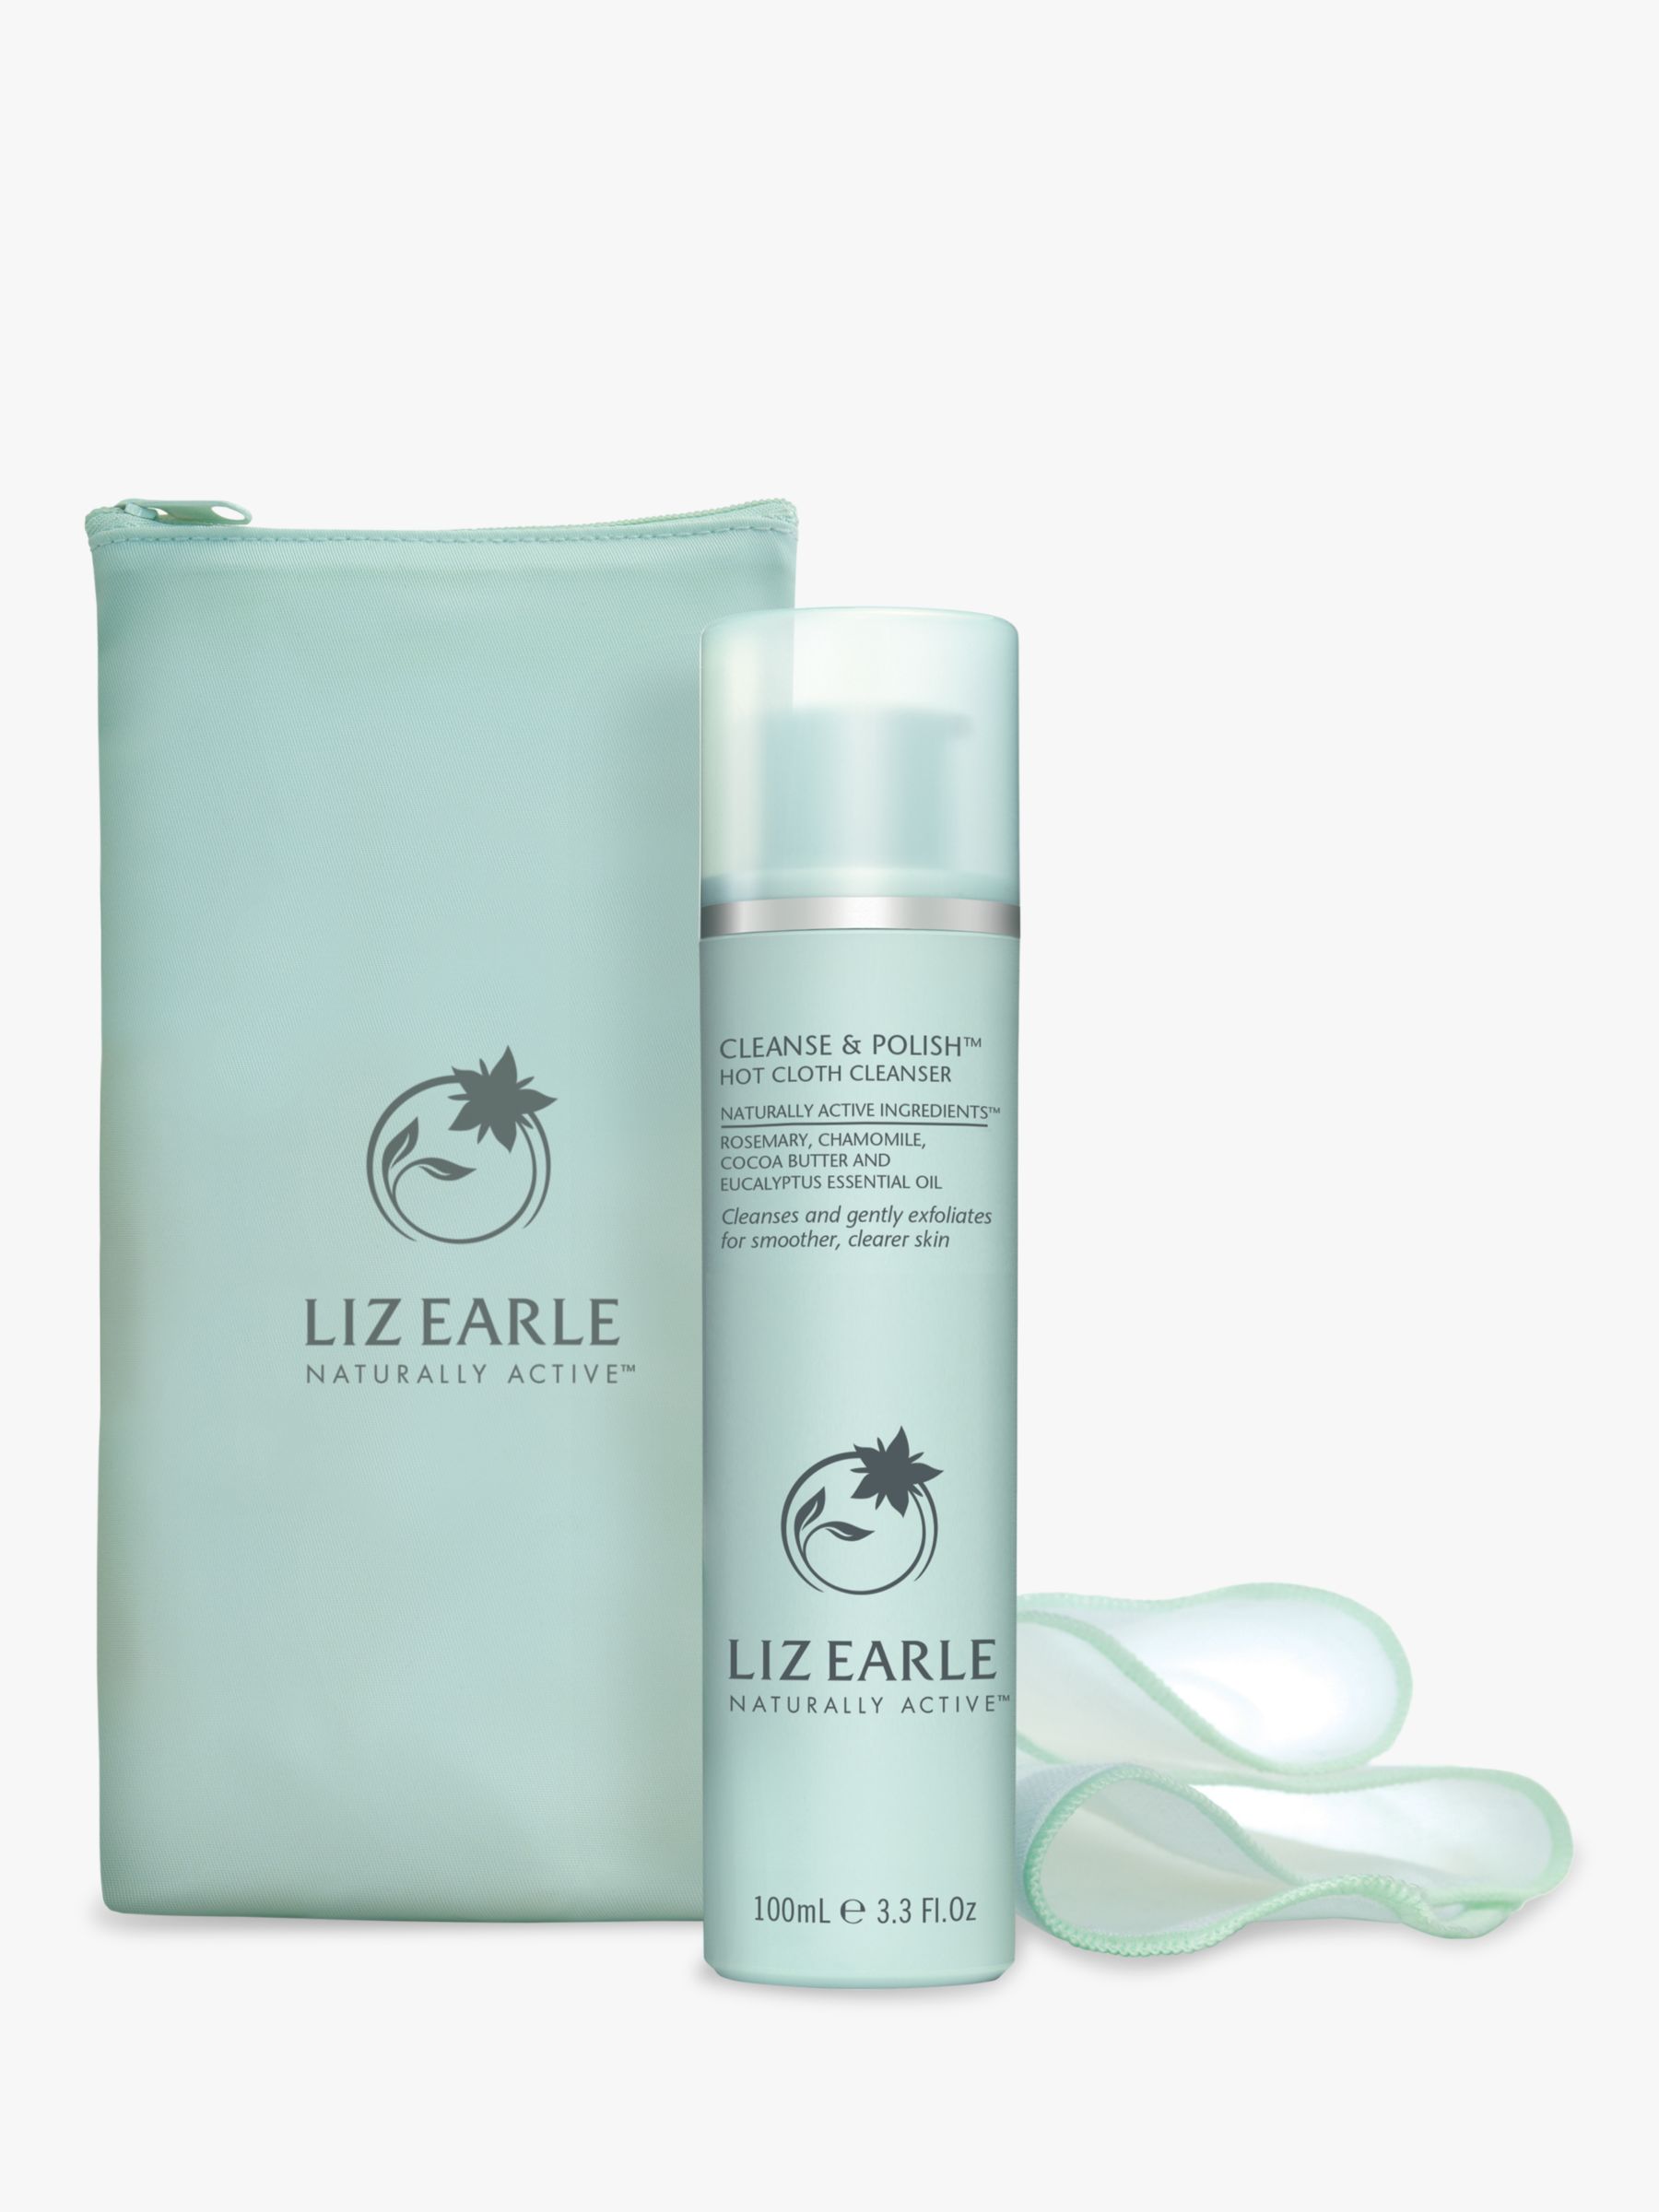 Liz Earle Cleanse And Polish™ Hot Cloth Cleanser 100ml With 2 Muslin Cloths